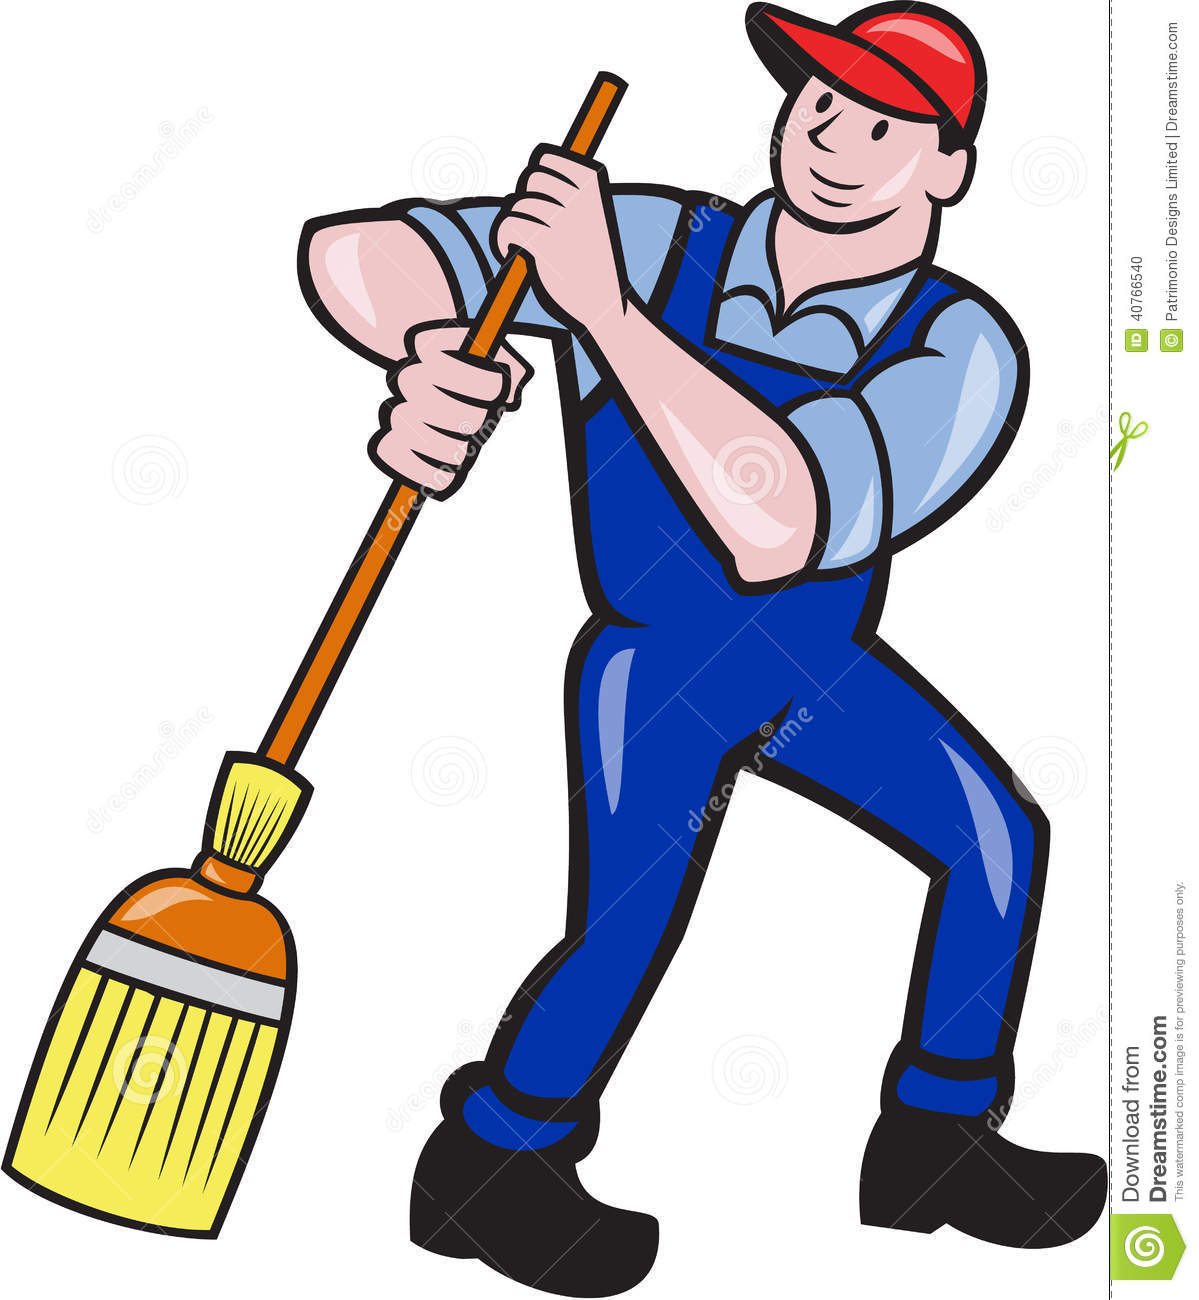 Illustration Of A Janitor Cleaner Worker Sweeping With Broom Viewed